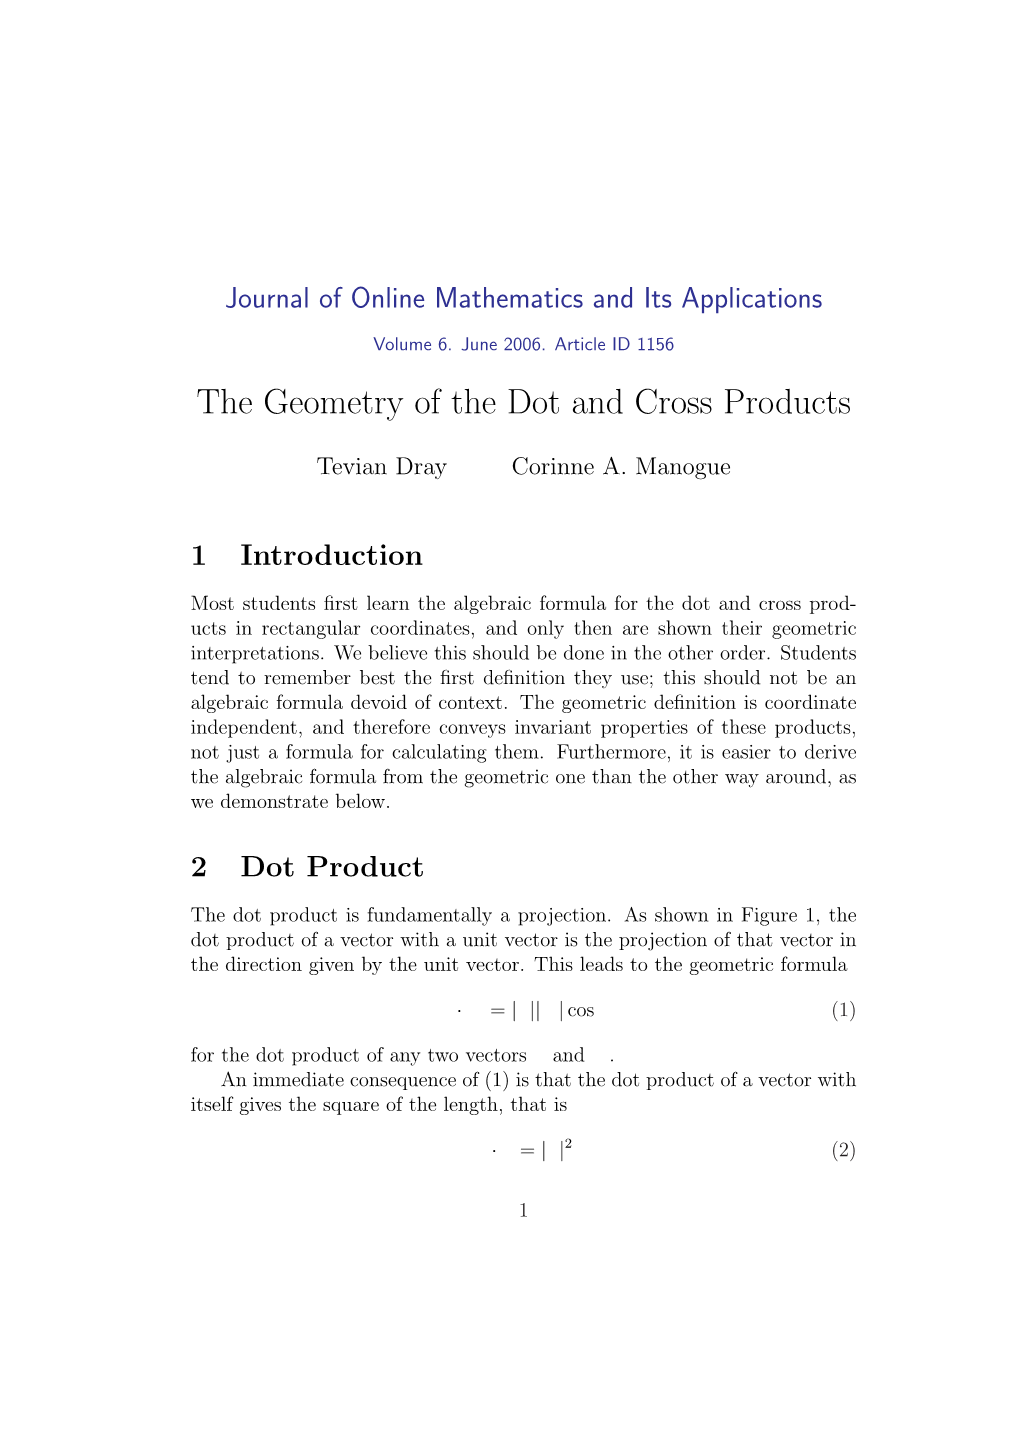 The Geometry of the Dot and Cross Products